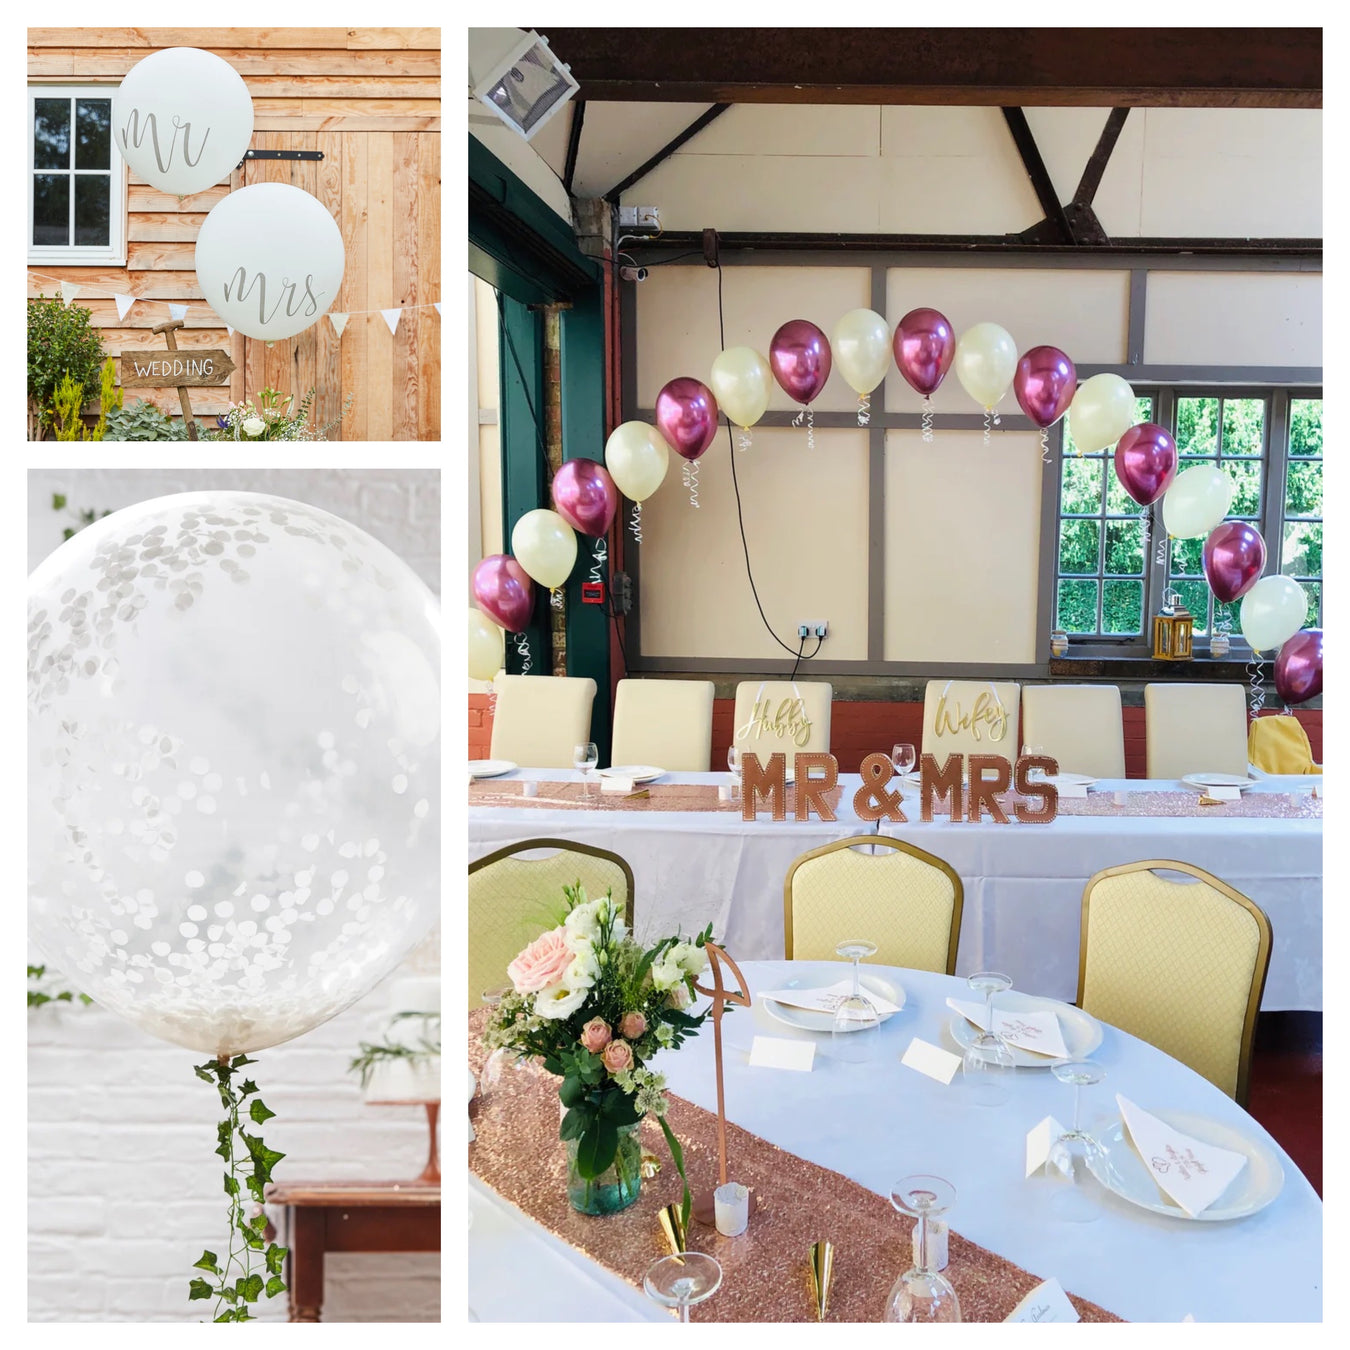 Weddings (Special Occasion Balloon Displays)